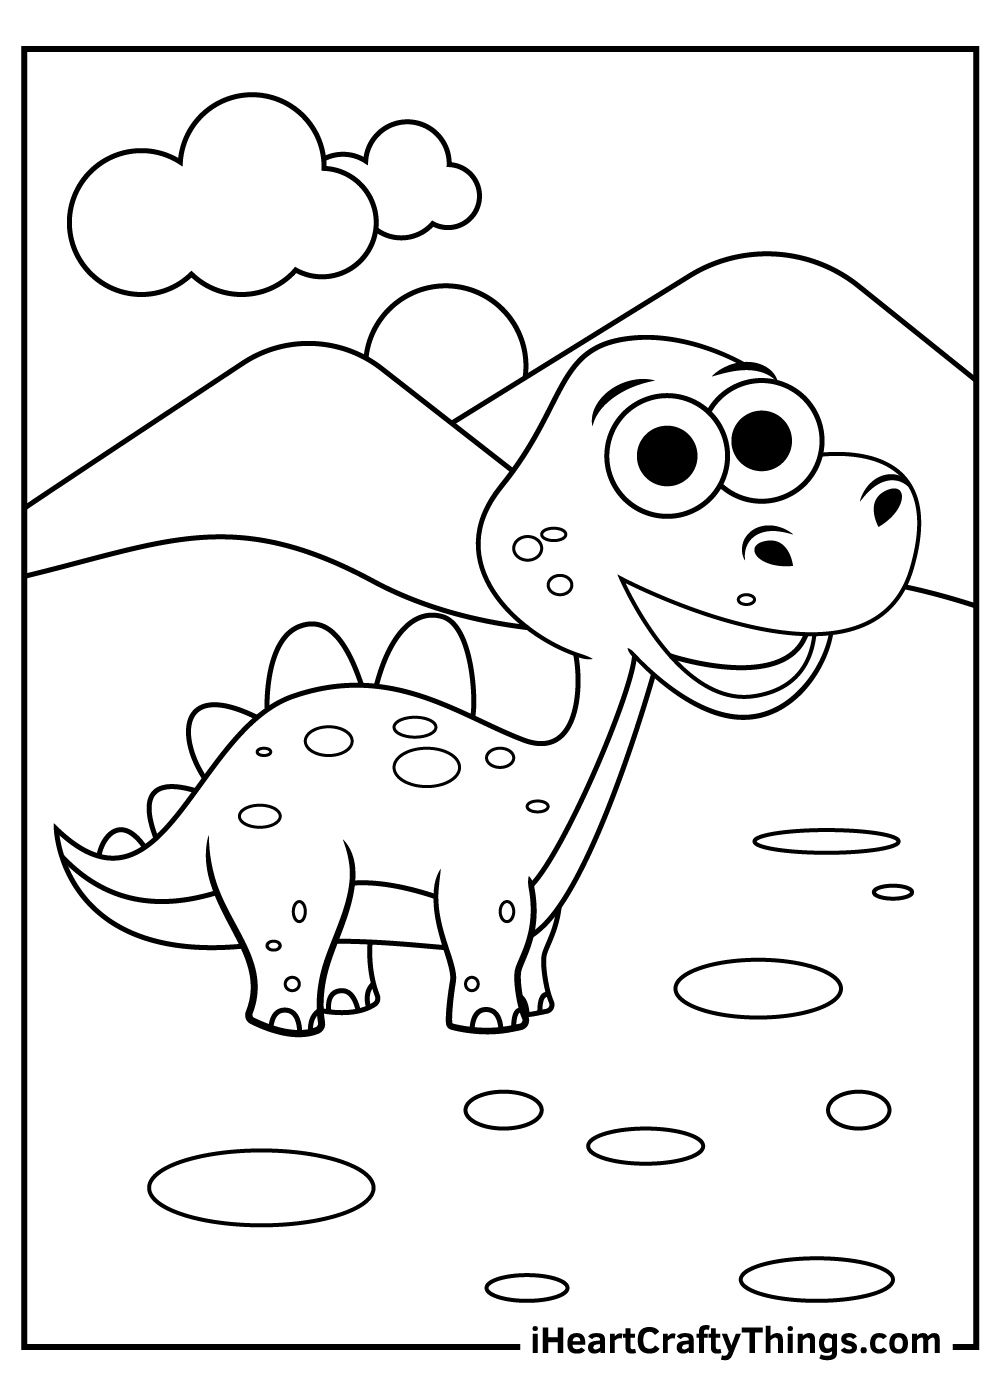 Cute dinosaurs coloring pages dinosaur coloring pages coloring pages kindergarten coloring pages